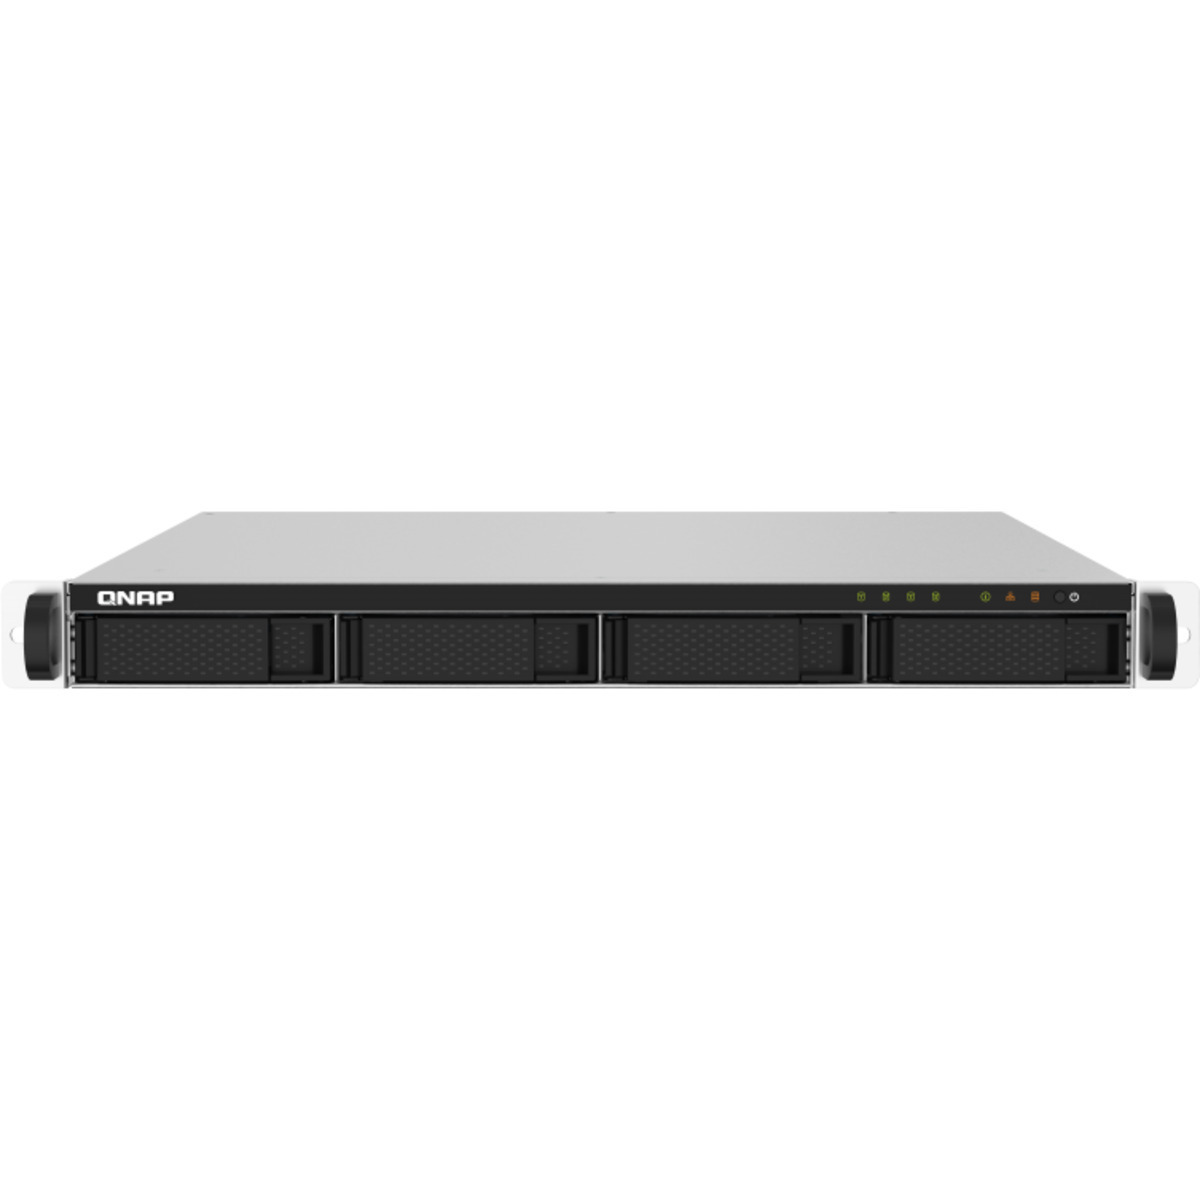 QNAP TS-432PXU 8tb 4-Bay RackMount Personal / Basic Home / Small Office NAS - Network Attached Storage Device 4x2tb Western Digital Red Plus WD20EFZX 3.5 5400rpm SATA 6Gb/s HDD NAS Class Drives Installed - Burn-In Tested - FREE RAM UPGRADE TS-432PXU